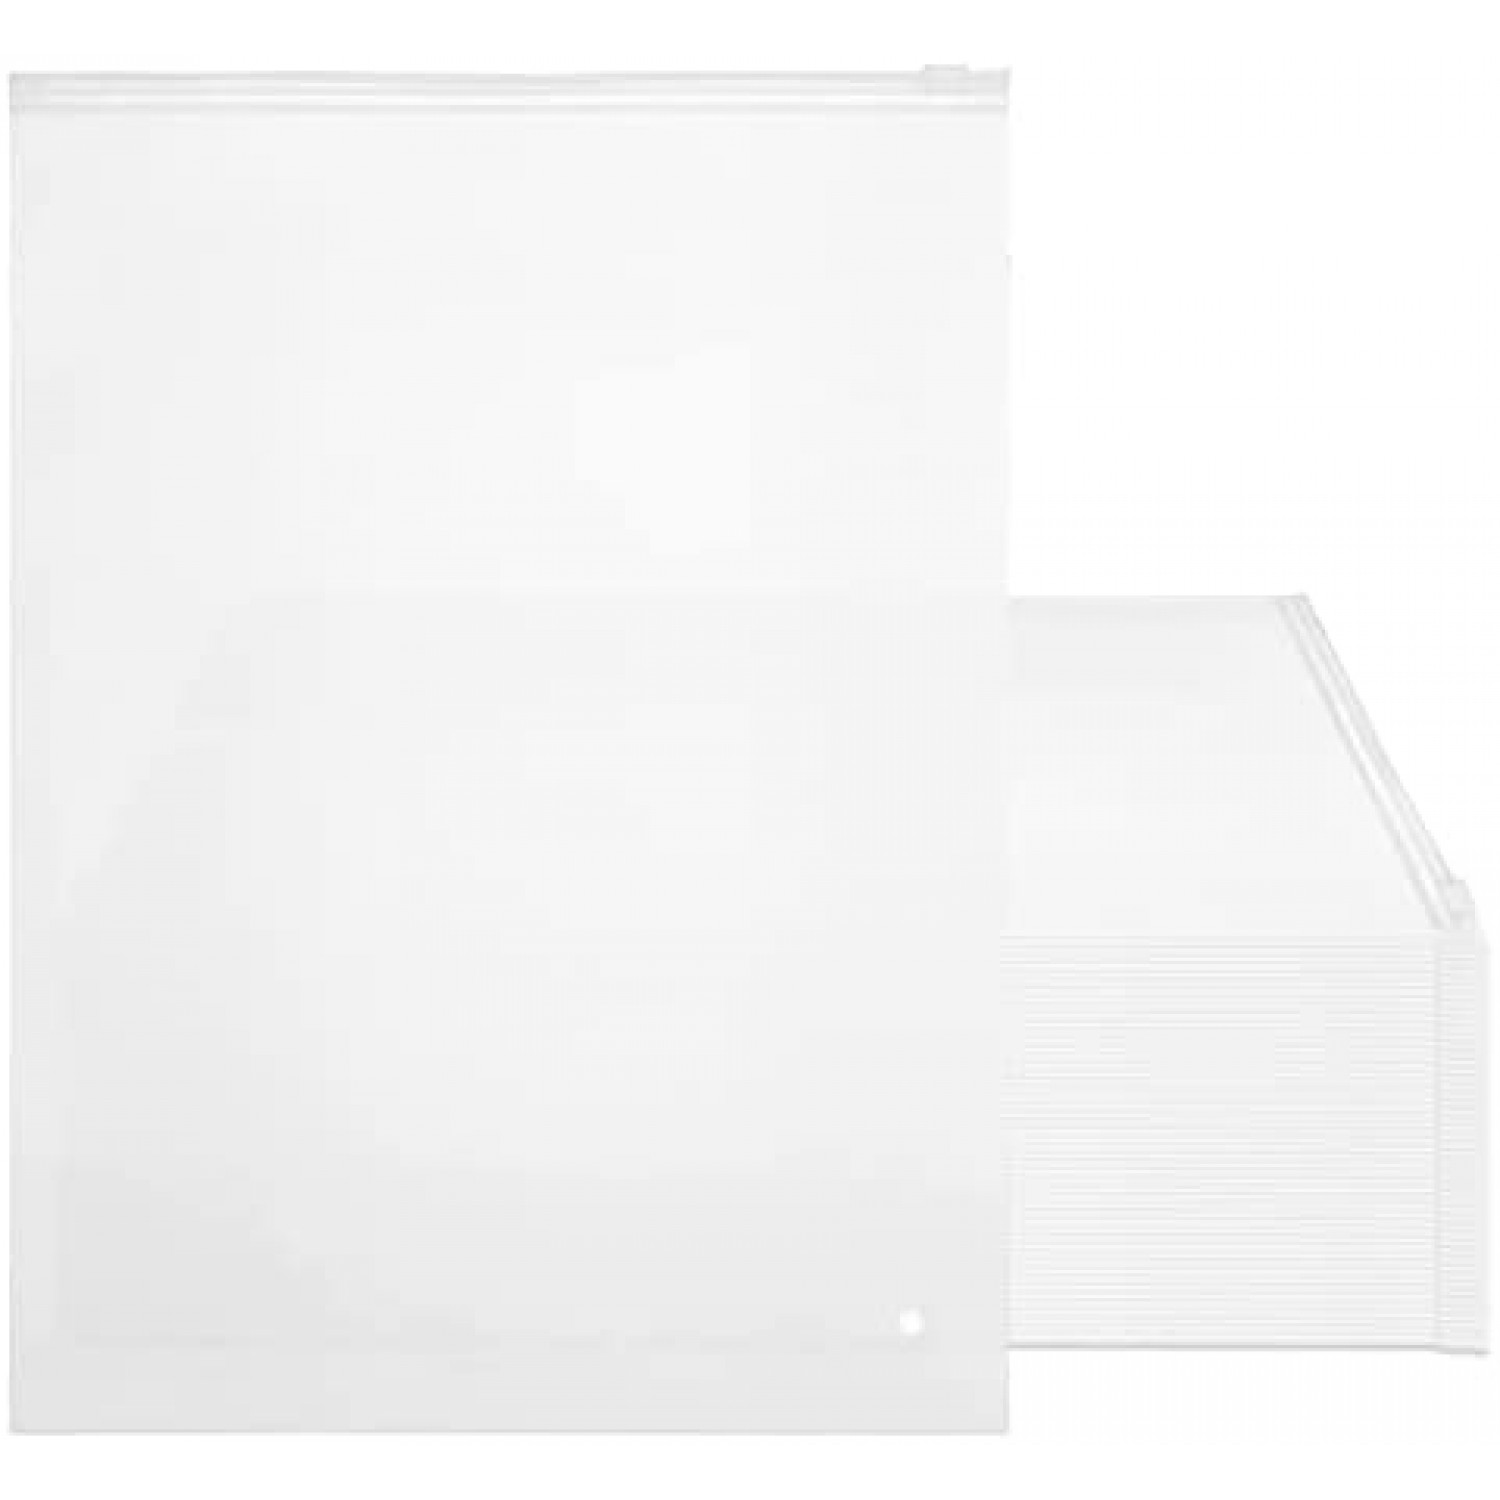 https://www.svaldo.com/image/cache/catalog/svaldo-amazon-2022-01-06/Frosted-Zipper-Poly-Bags-Svaldo-50-Pack-1134x1534-Shirt-Packaging-Bags-3-Mil-Clear-Resealable-Appare-B09K3BXG8R-2105-1500x1500.jpeg